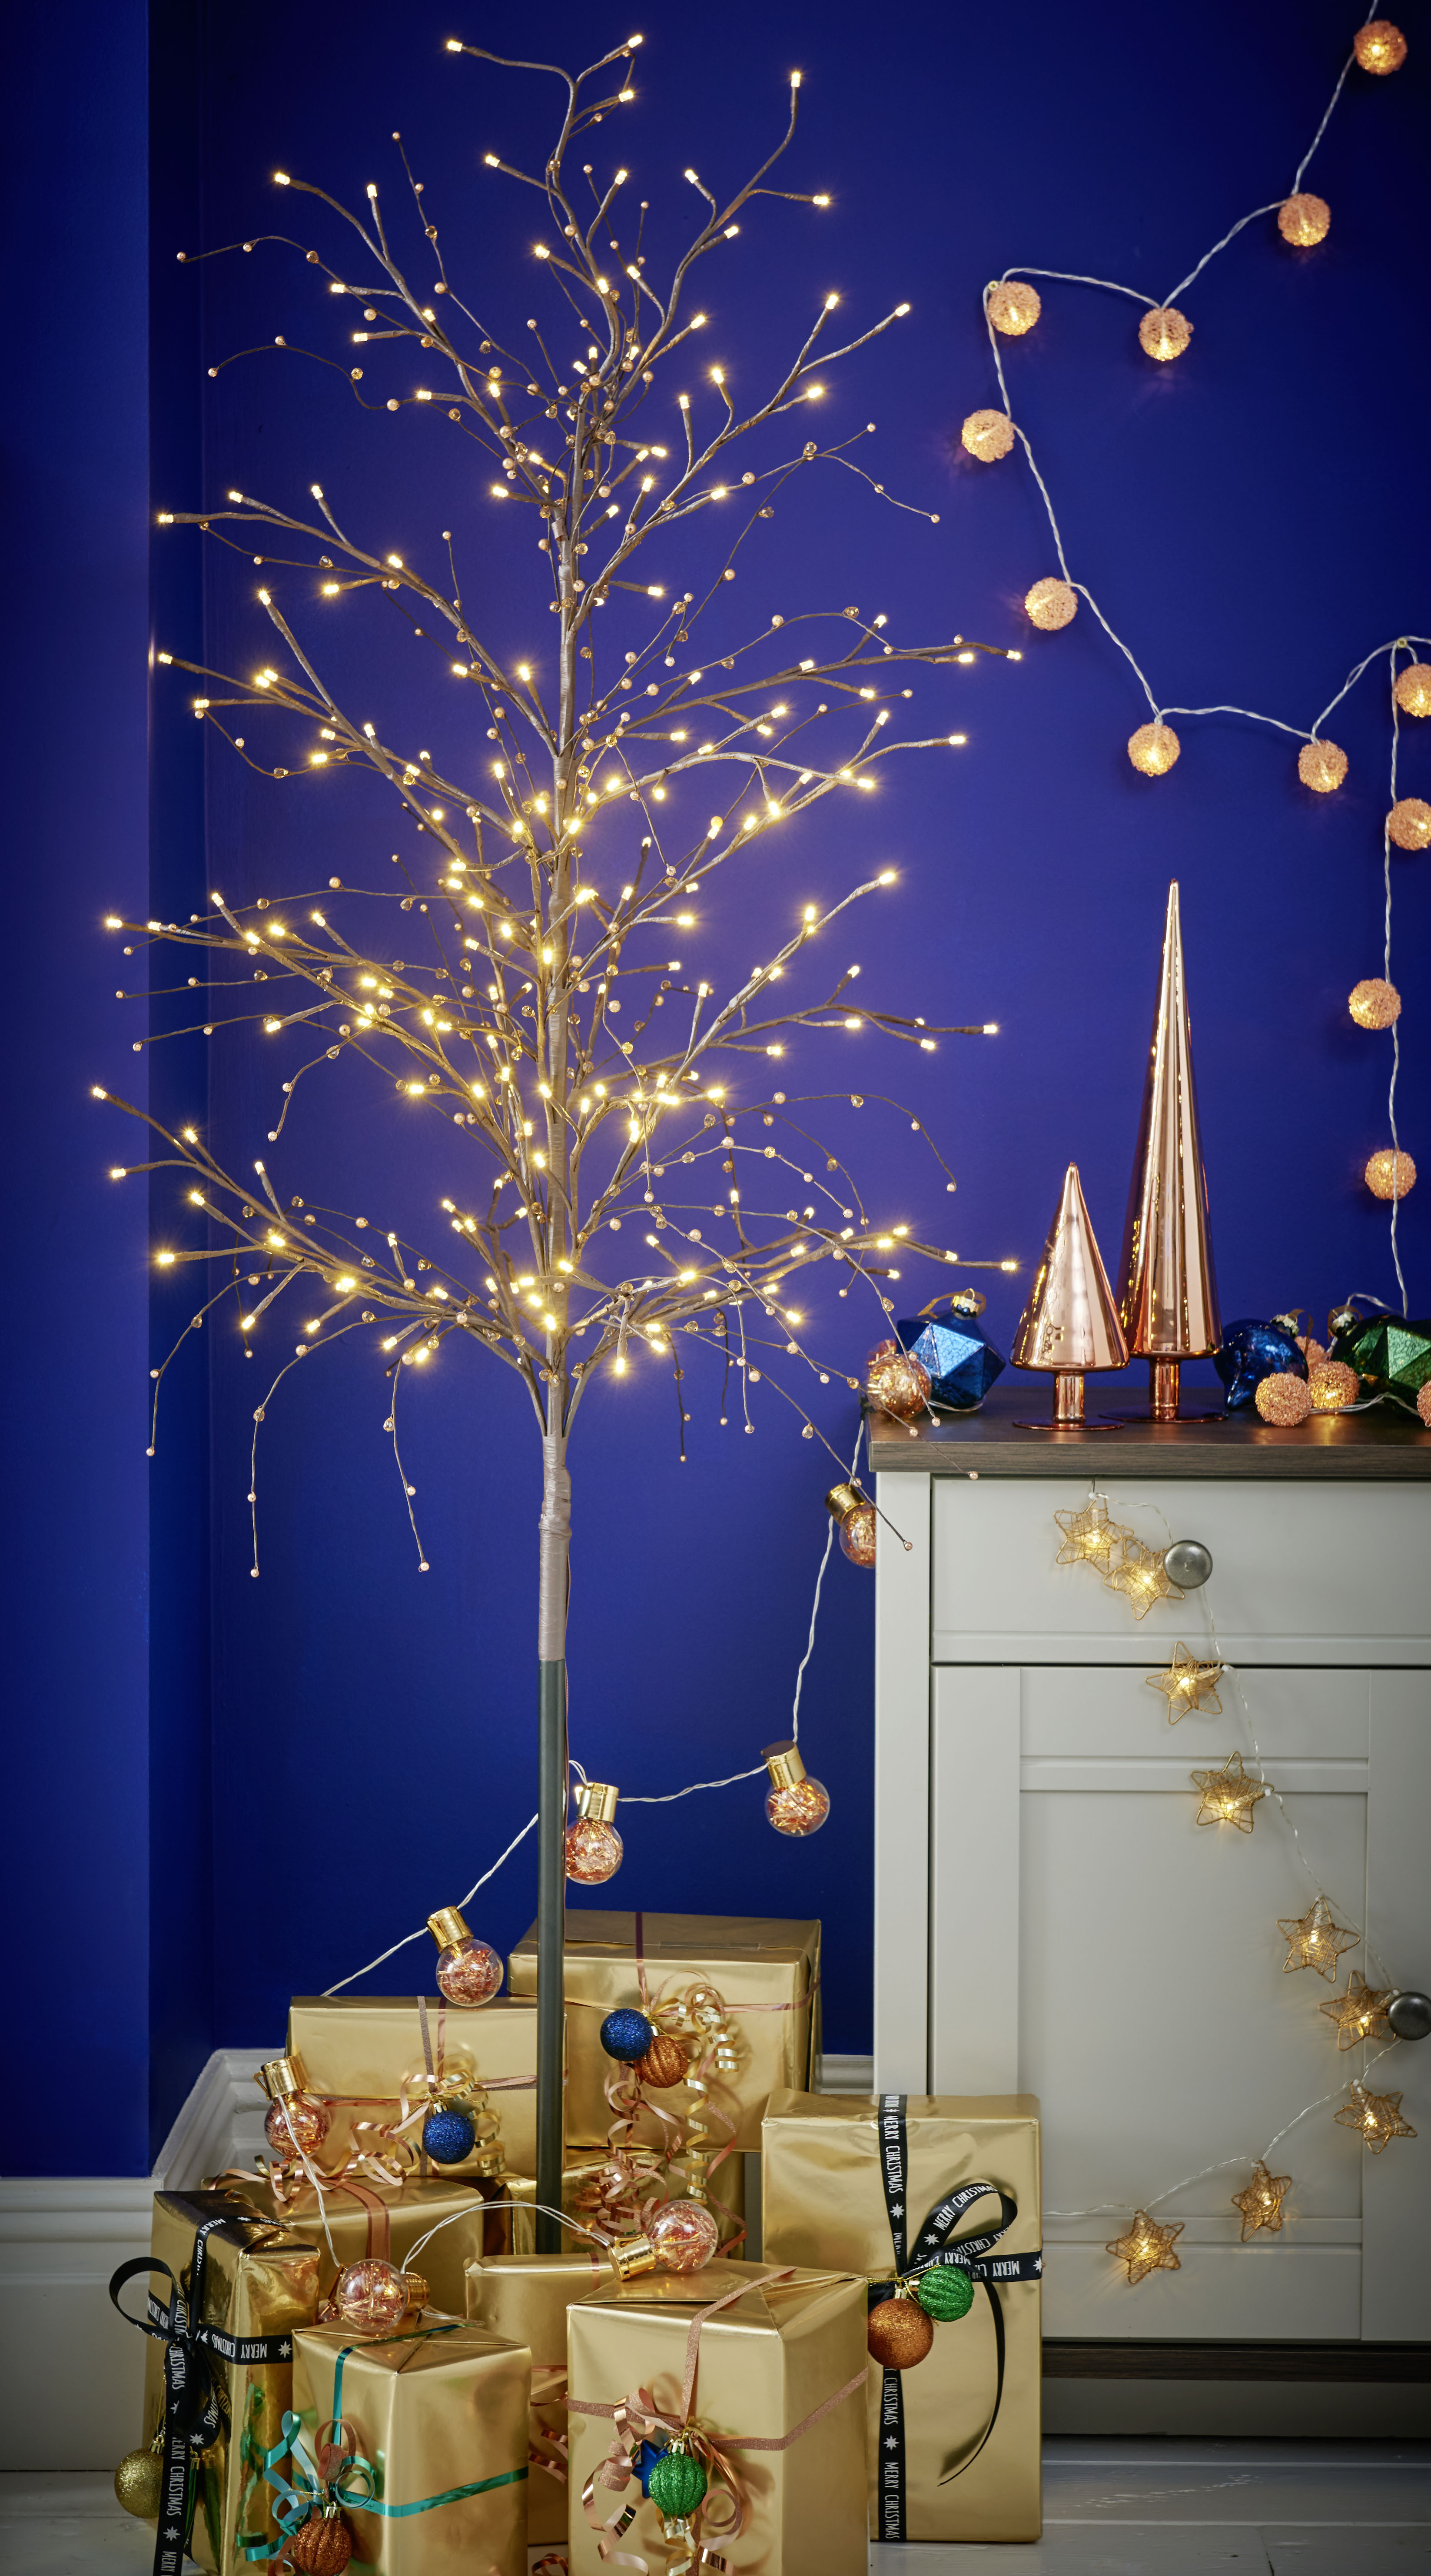 Indoor Christmas Lights
 How To Choose The Best Indoor Christmas Lights